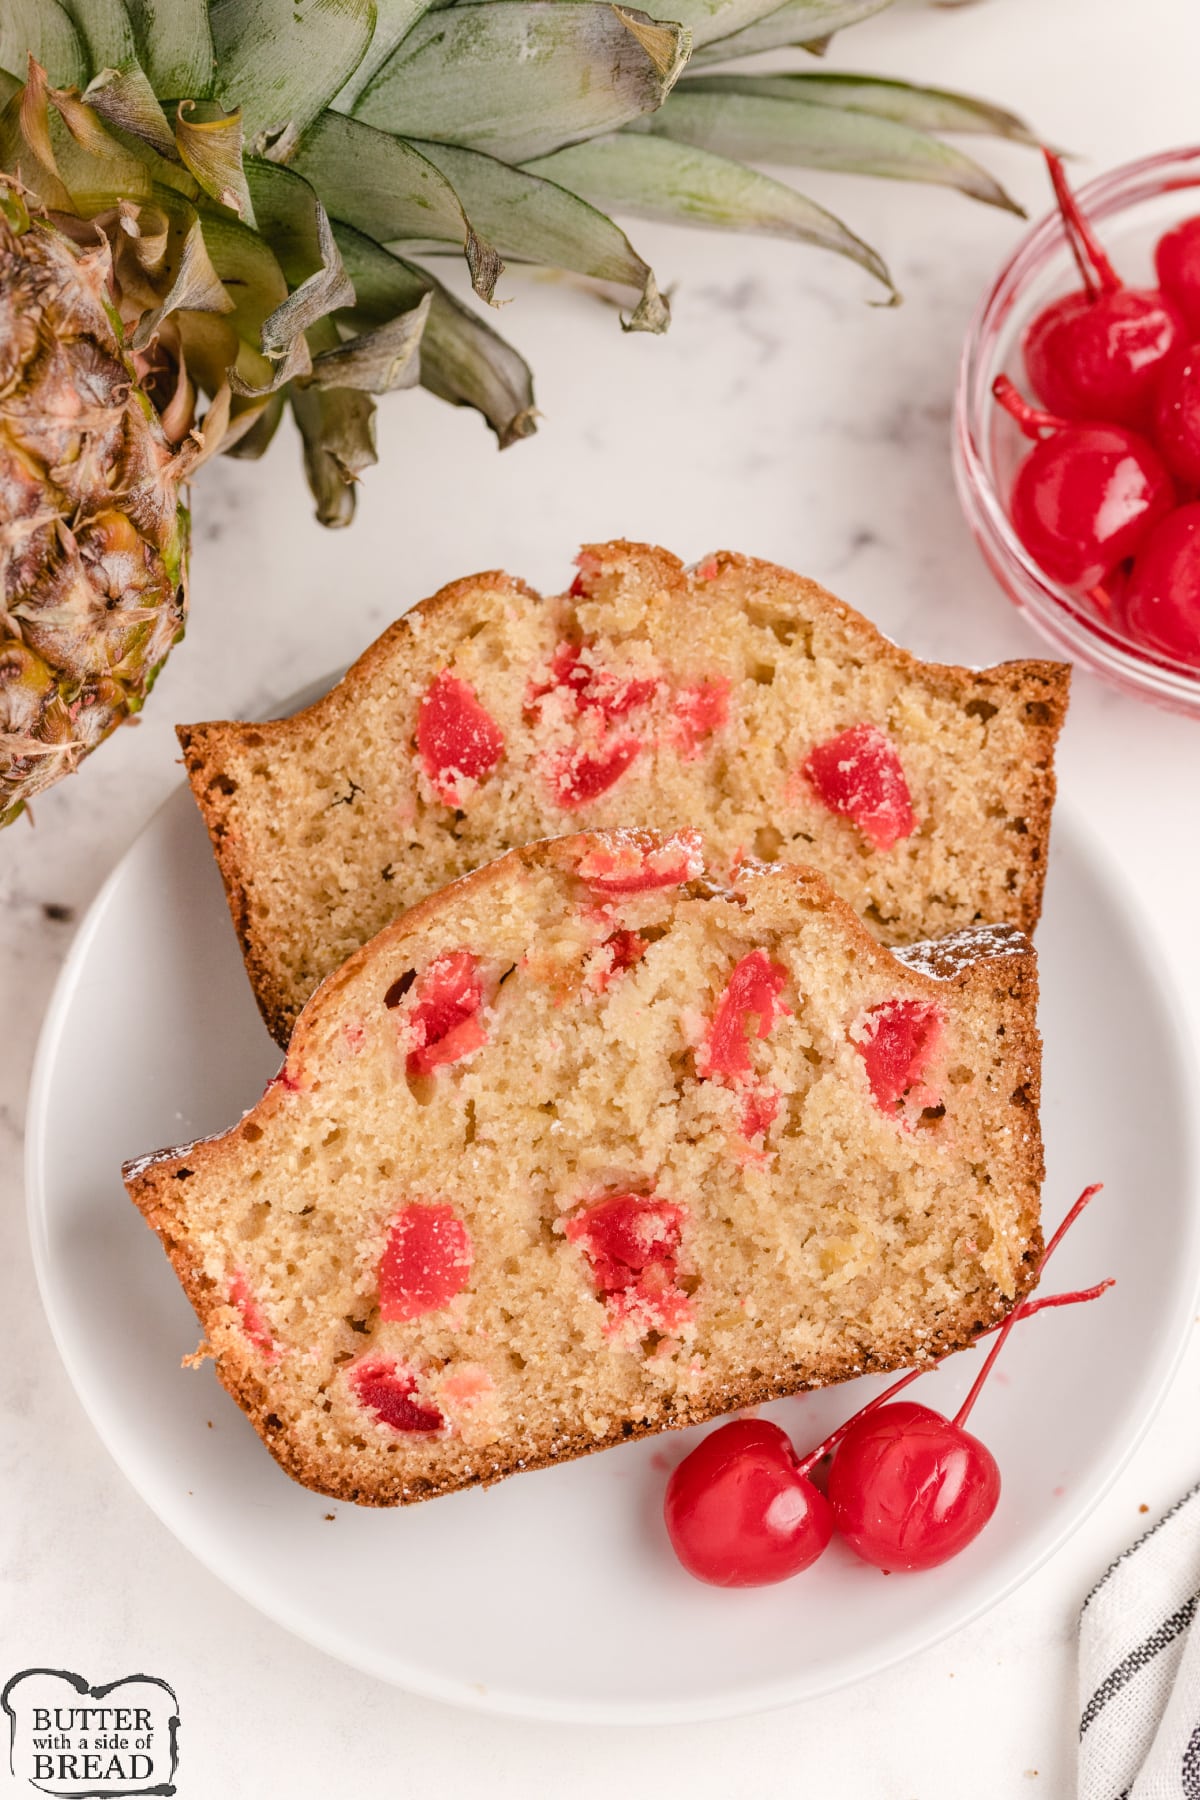 Pineapple Cherry Quick Bread made with crushed pineapple and maraschino cherries. Simple quick bread recipe that everyone loves!